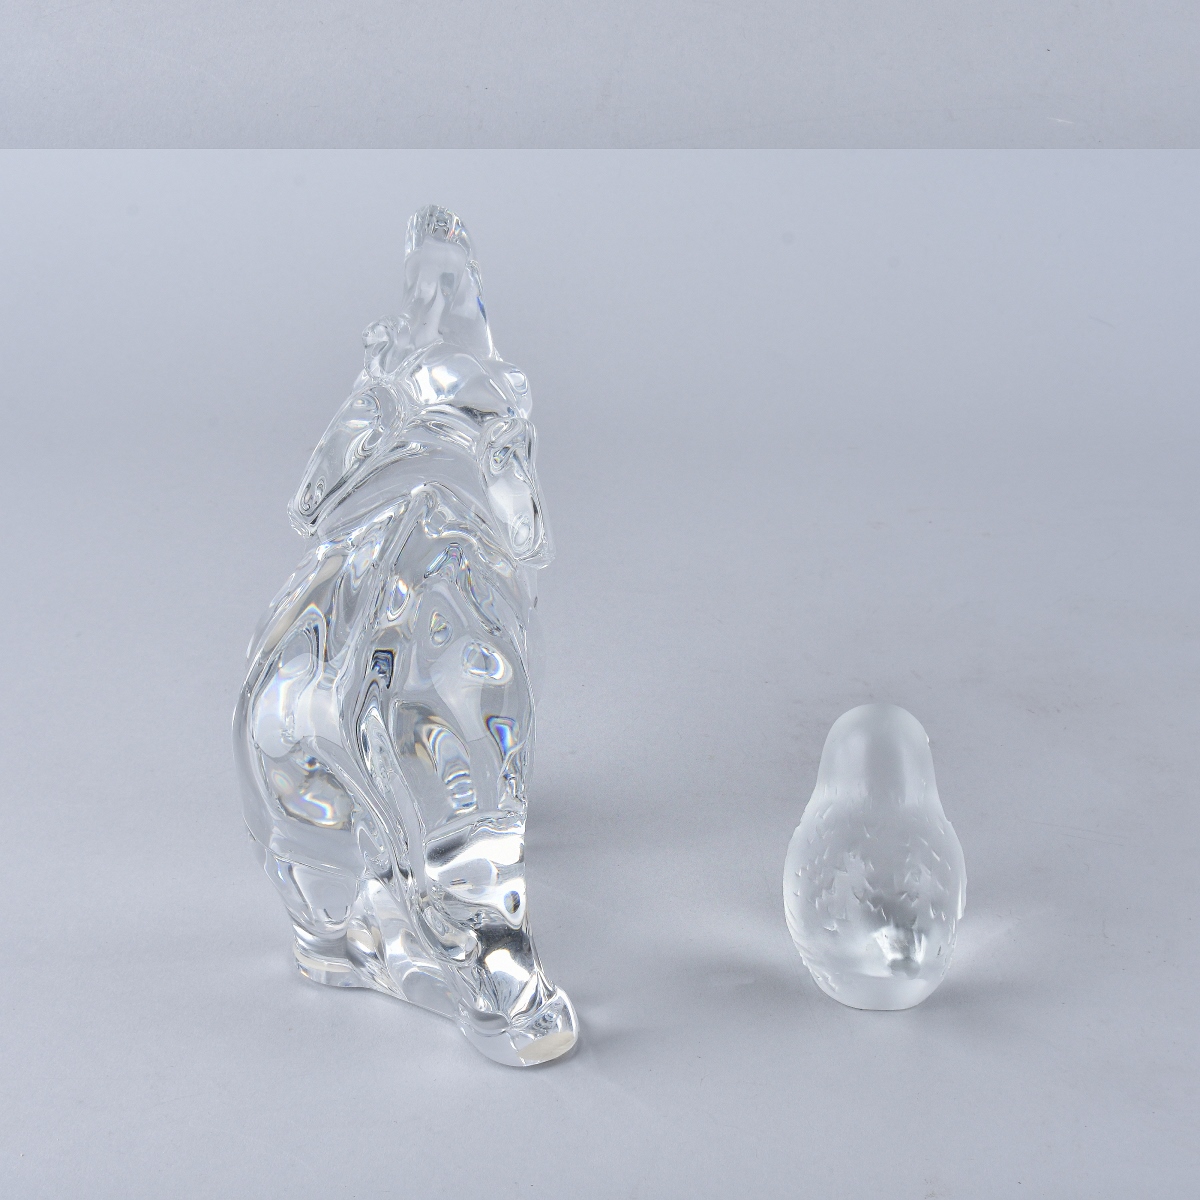 Two Vintage Crystal Figurines Elephant and Bird